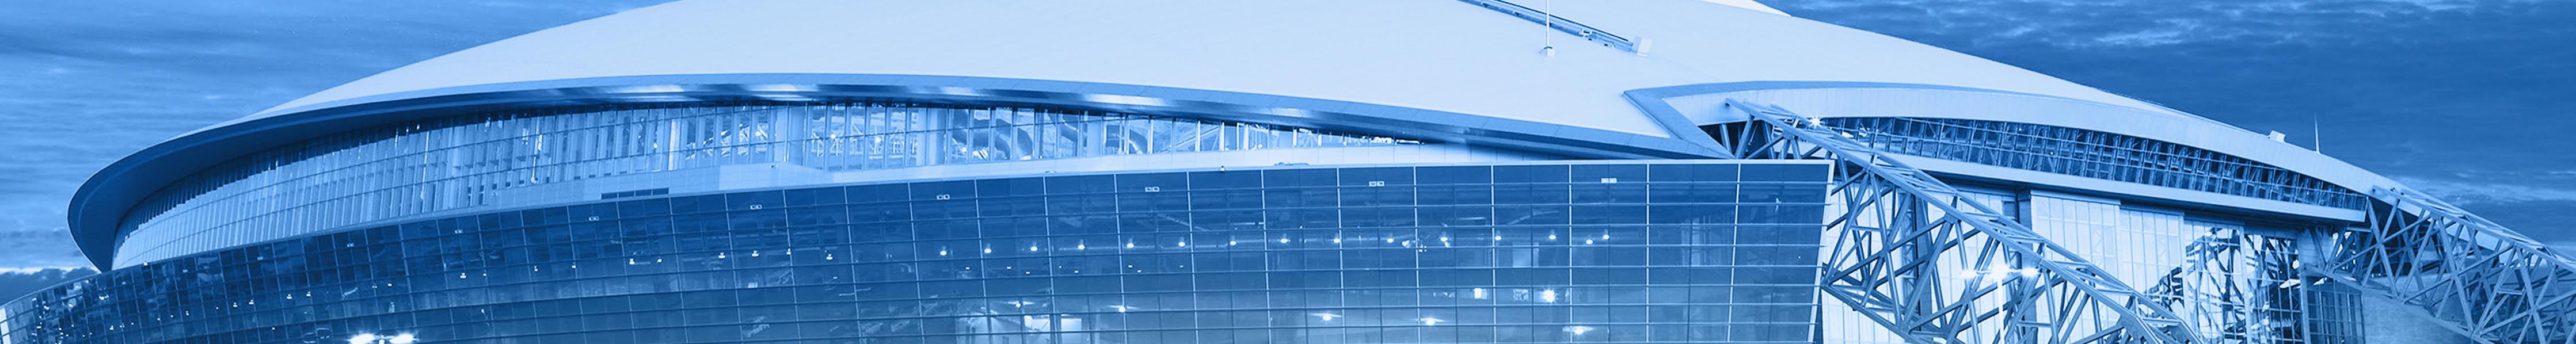 blue colored banner, the AT&T stadium is centered across the panoramic view